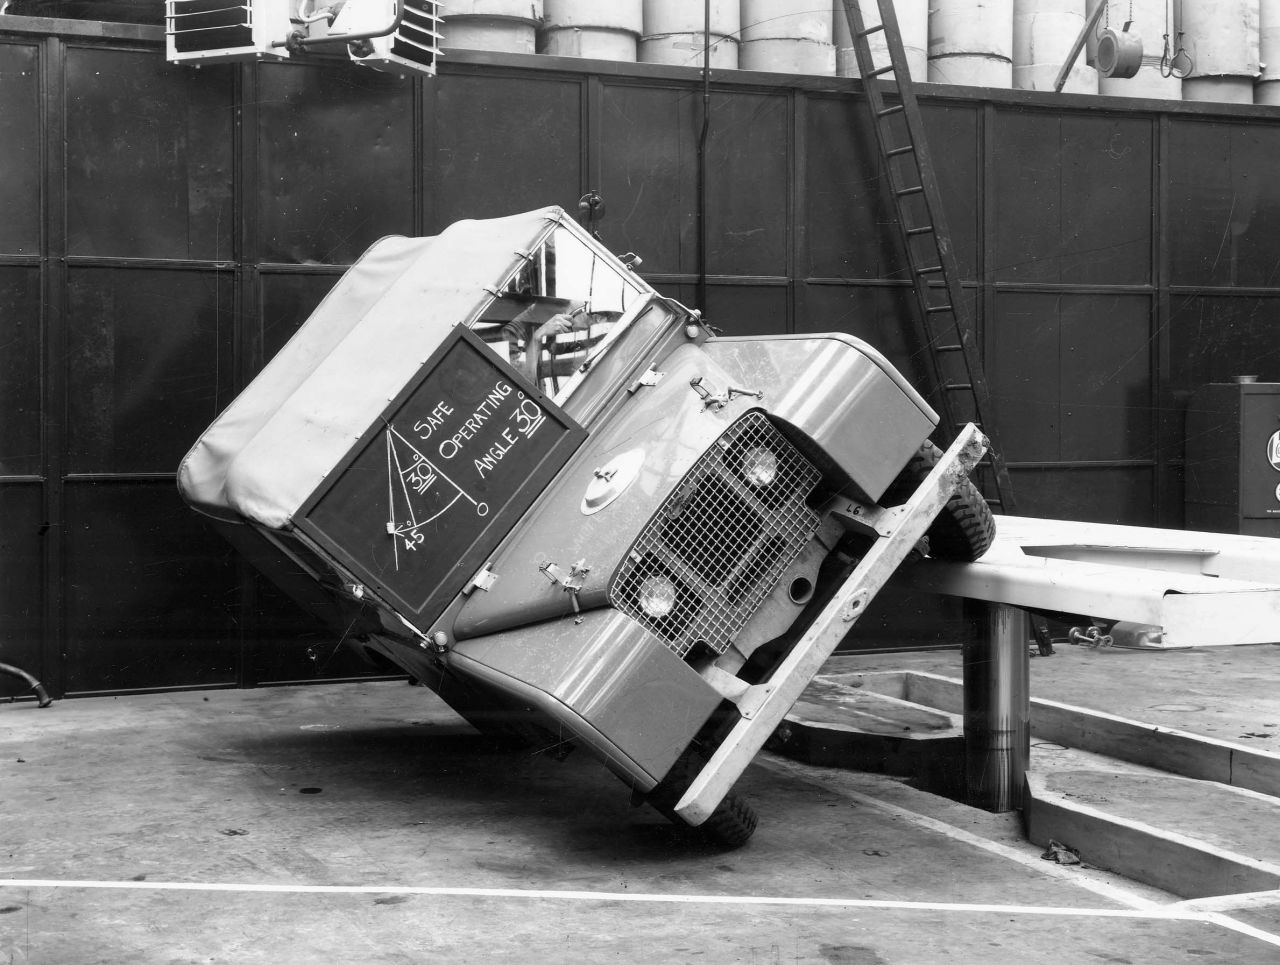 Engineers tested the original Land Rover's capabilities in novel ways.